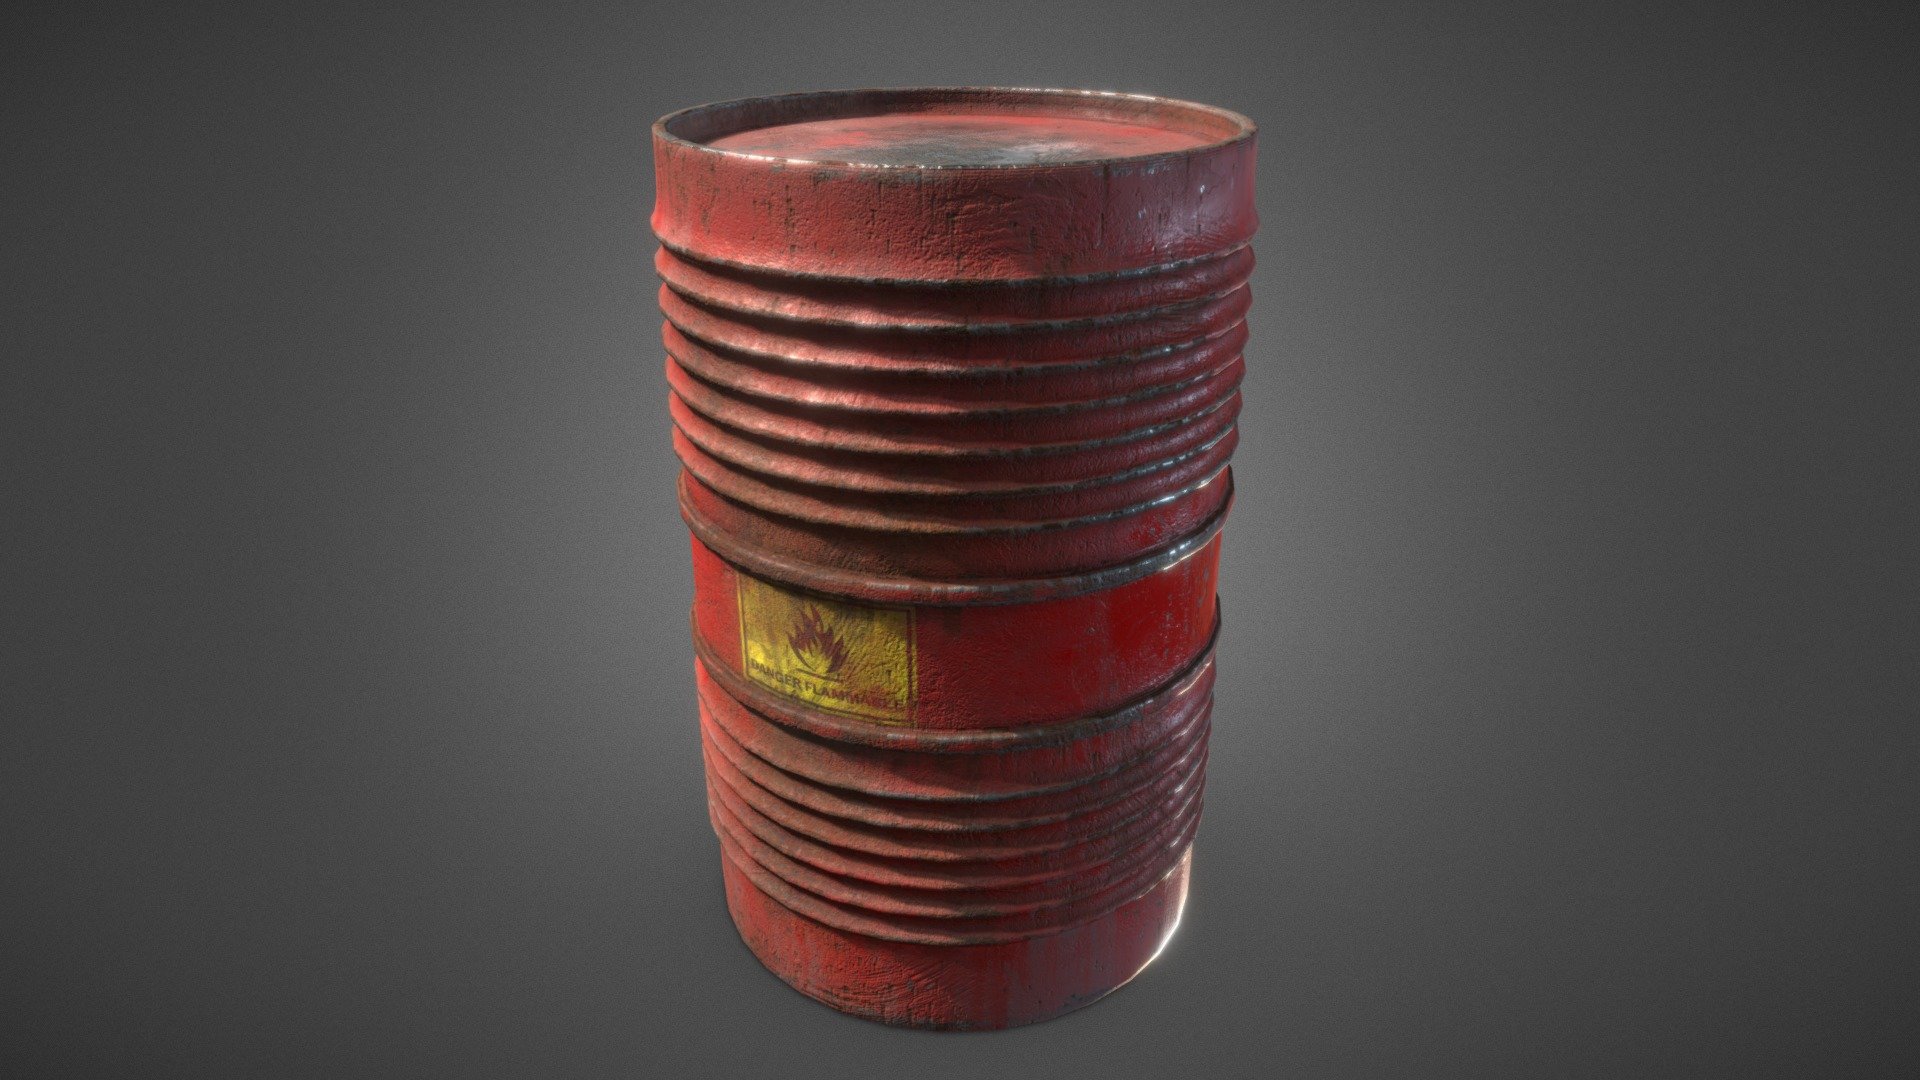 This is a 3d model of a red explosive barrel that i made for an environment, modeled in blender and textured in substance painter, hope you like it! - Dirty red barrel 3d model - 3D model by IPfuentes 3d model